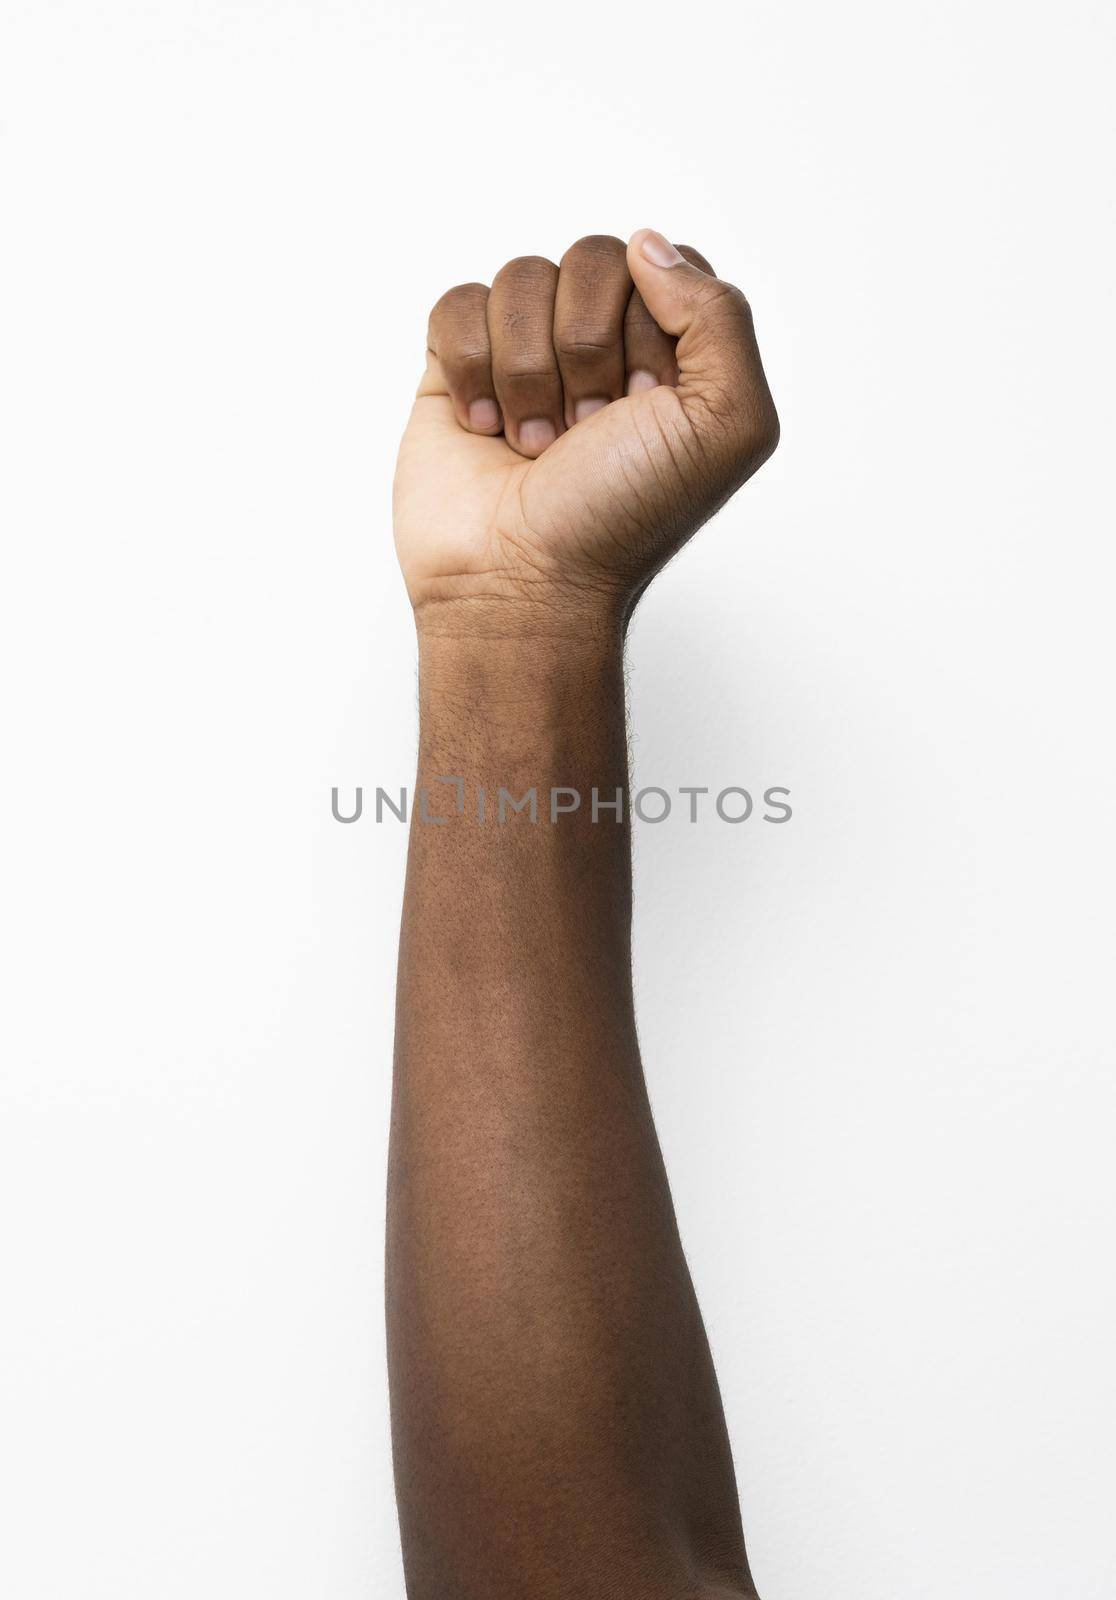 black person holding fist up by Zahard